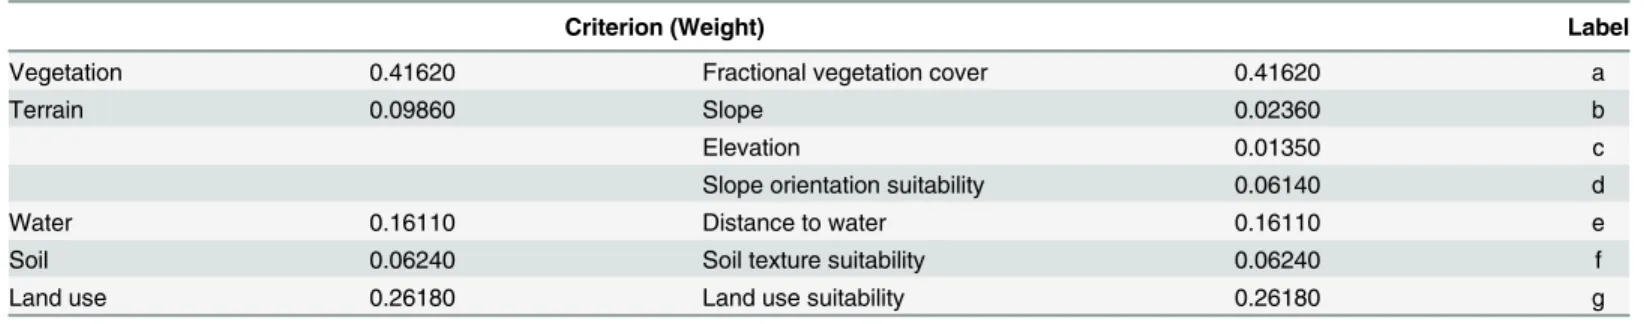 Table 1. Criterion tree and weight for evaluating ecological suitability.